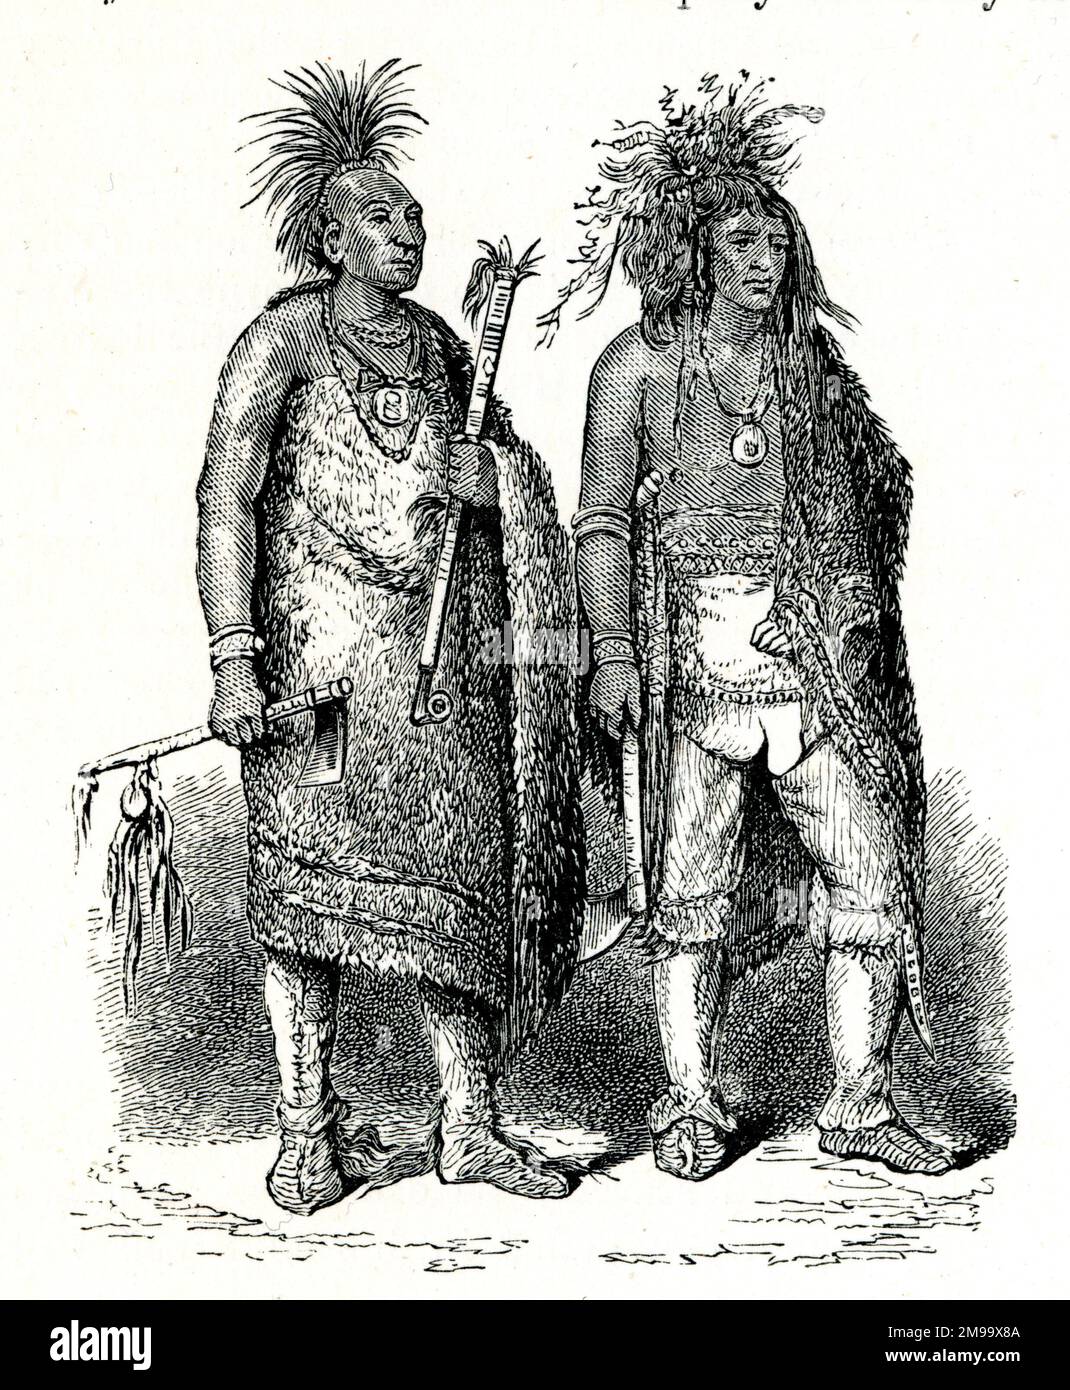 Native American Indians, Osage and Iroquois Chiefs. Stock Photo